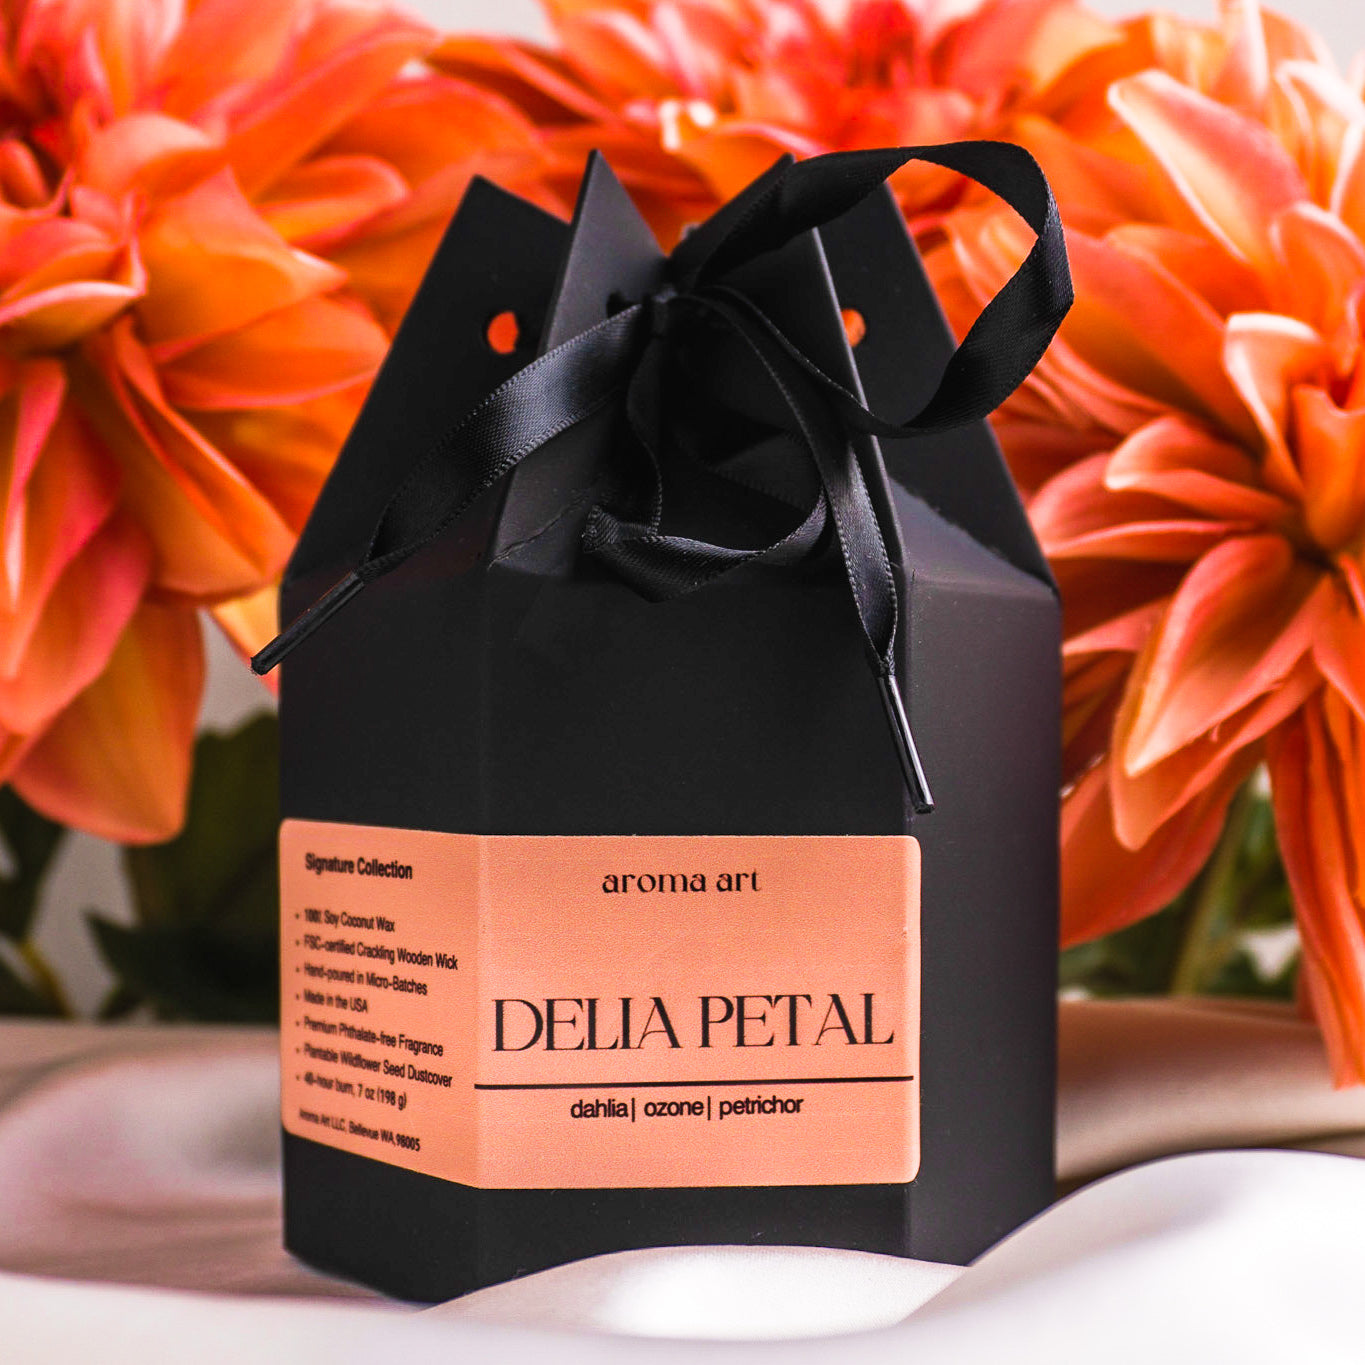 A 7oz luxurious soy-coconut wax crackling wooden wick fall candle called Delia Petal that will fill your home with the earthy, atmospheric, and refreshing scent of bitter dahlia, ozone, and petrichor. Perfect for a night of relaxation or a cozy fall evening. Shown in its luxe black gift box, perfect for gifting.